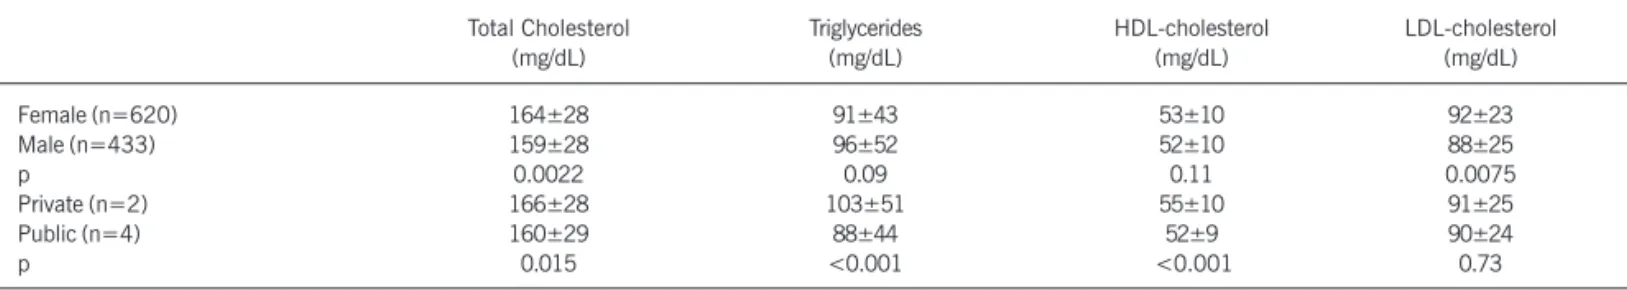 Table II – Comparison of serum concentration of lipids (mg/dL) among genders and type of school in Florianópolis, 2001.